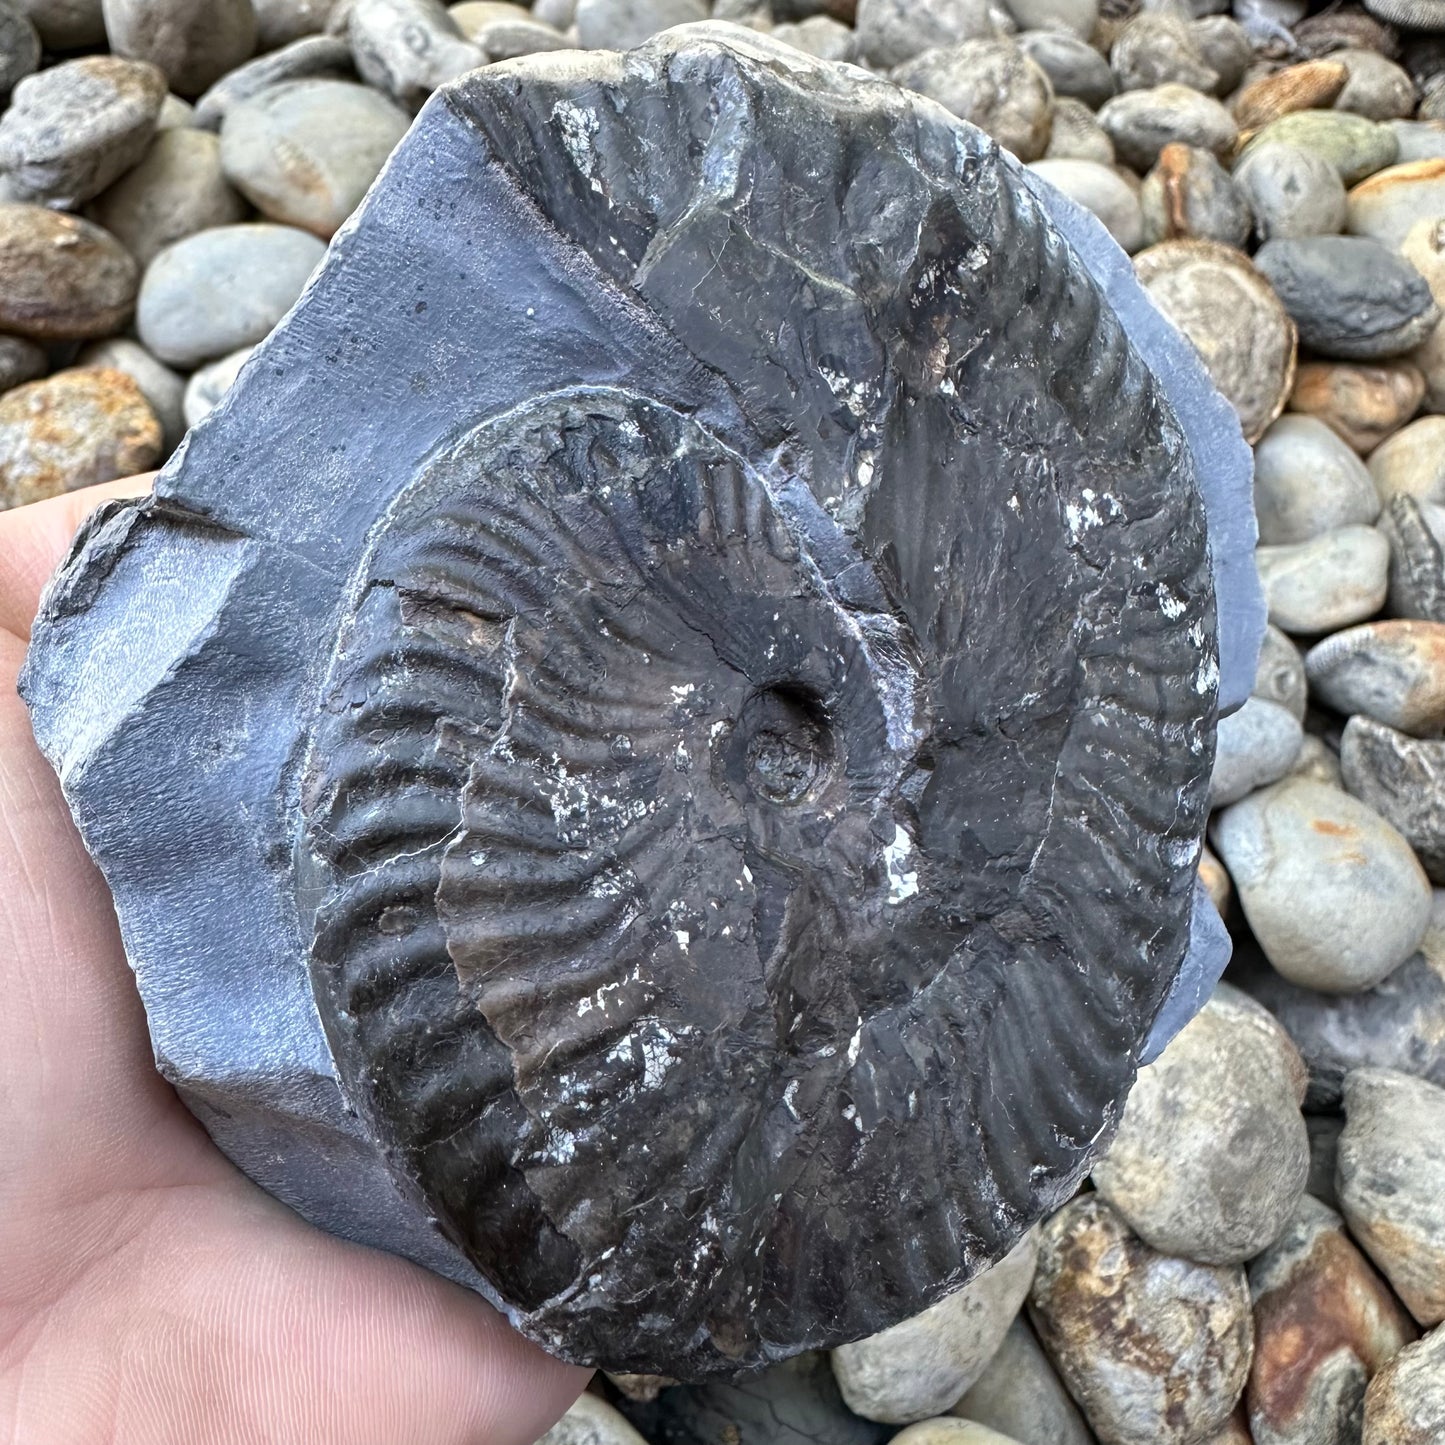 Pseudolioceras lythense ammonite fossil - Whitby, North Yorkshire, Yorkshire Fossils on the Jurassic Coast